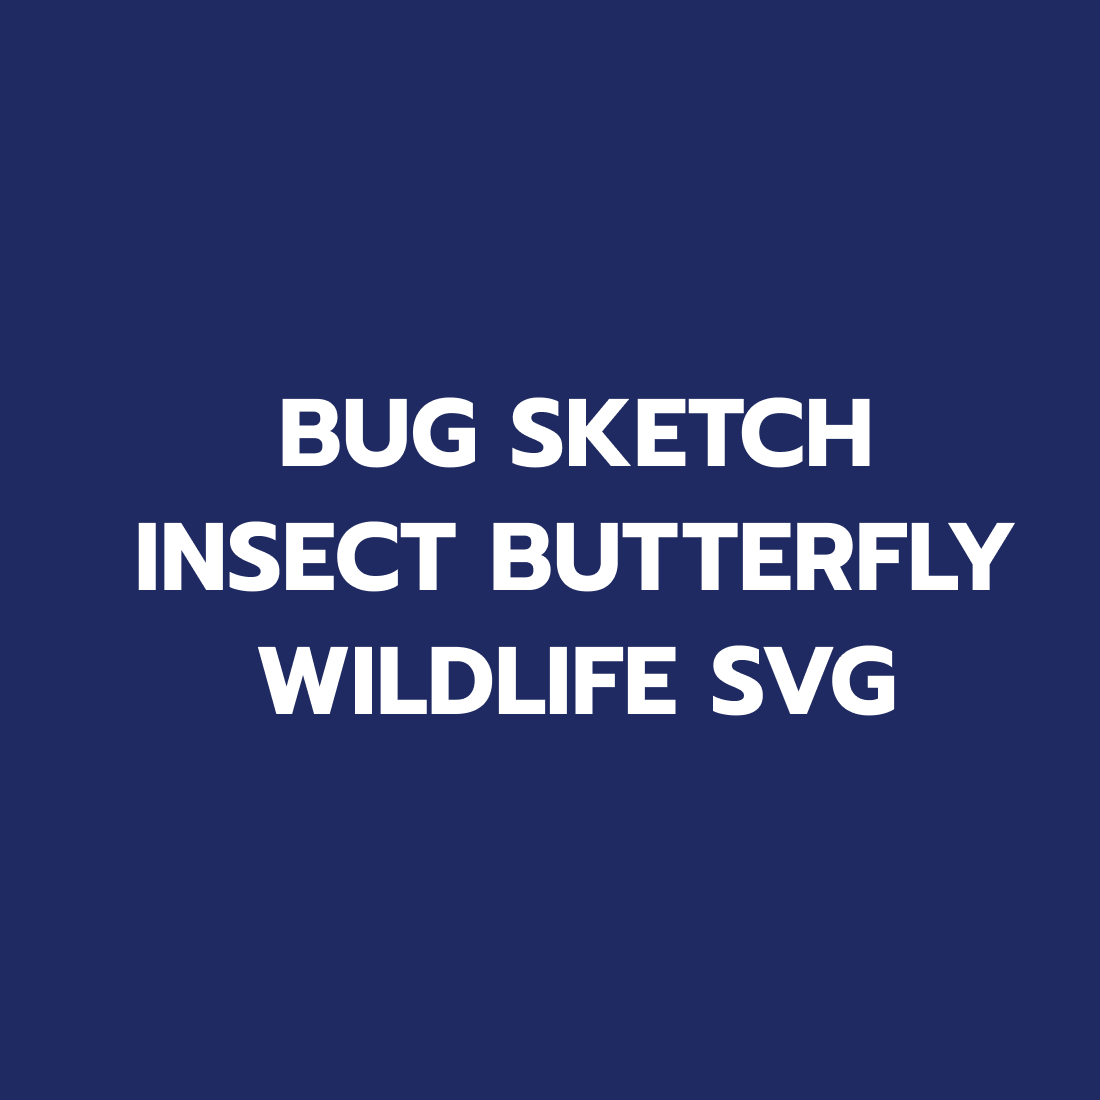 bug sketch insect butterfly wildlife svg